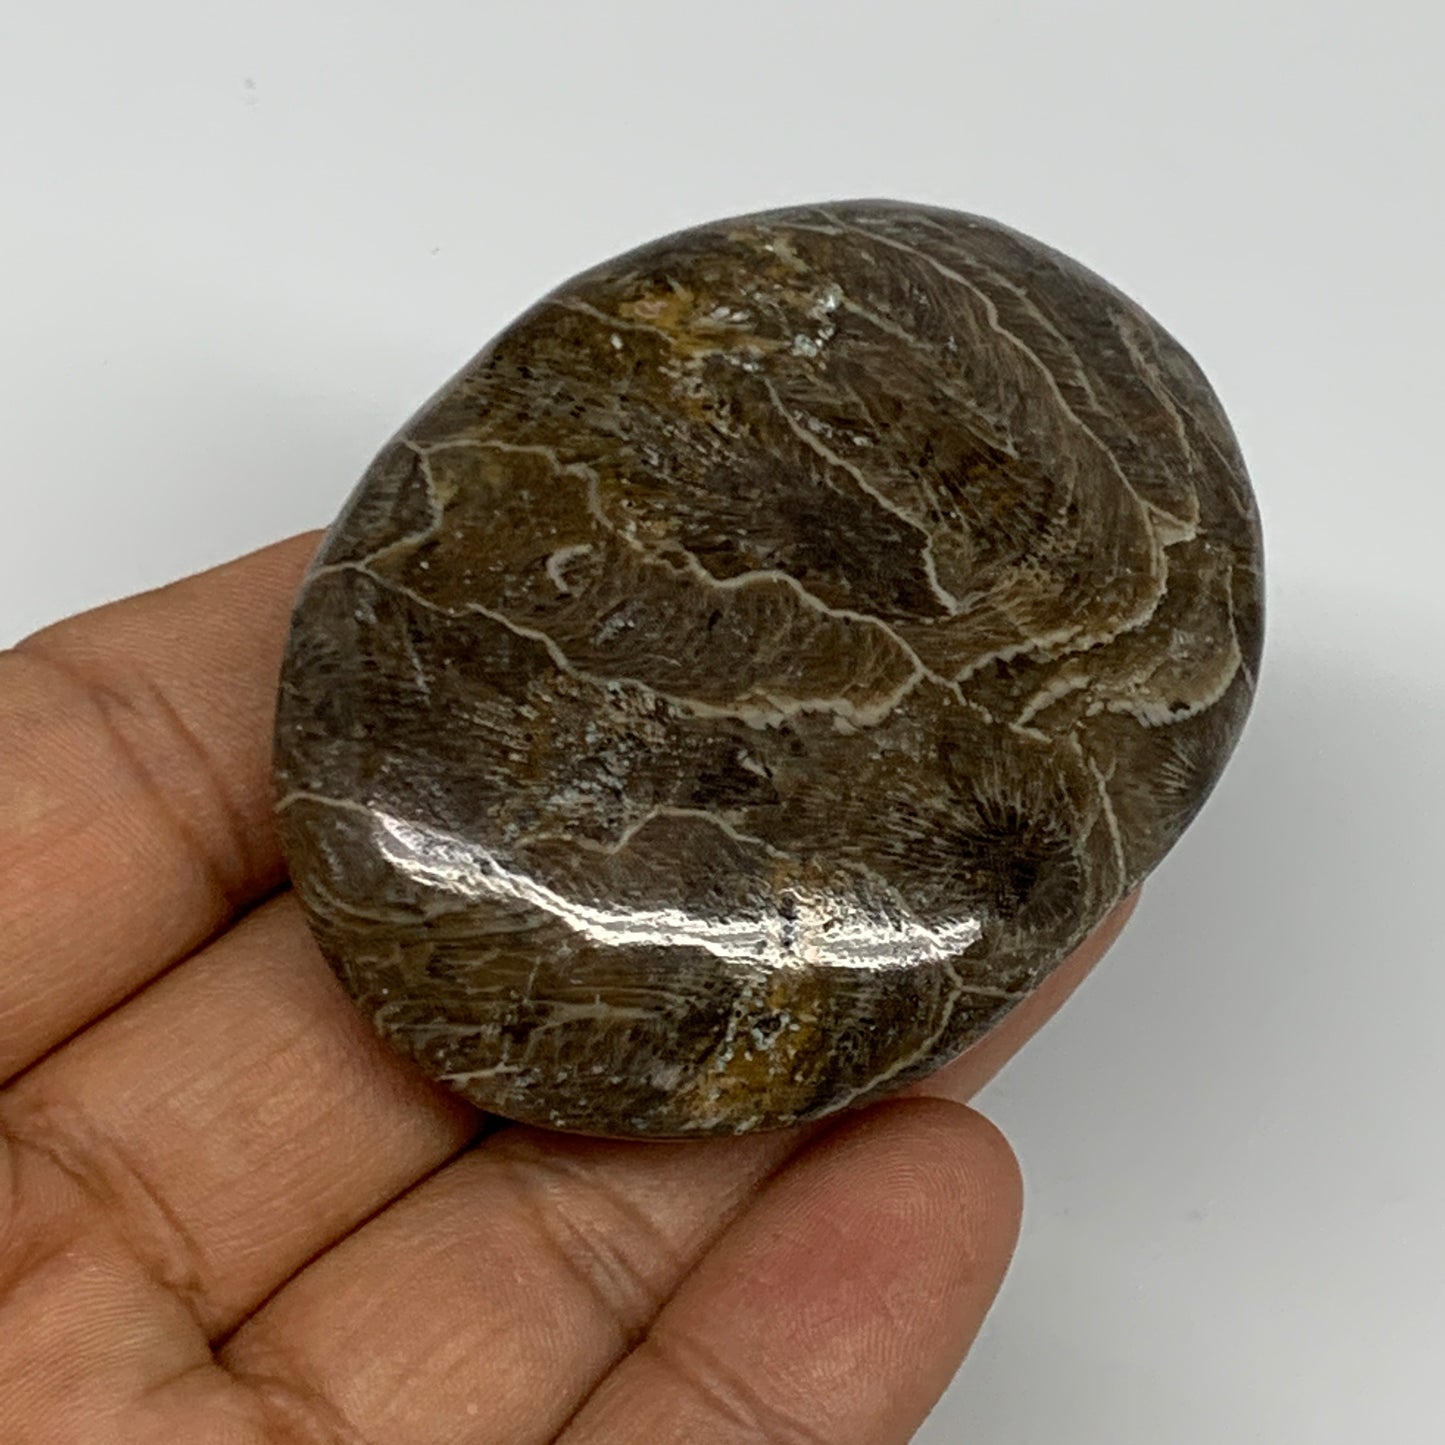 78.8g,2.5"x1.9"x 0.8", Coral Fossils Palm-Stone Polished from Morocco, B20354